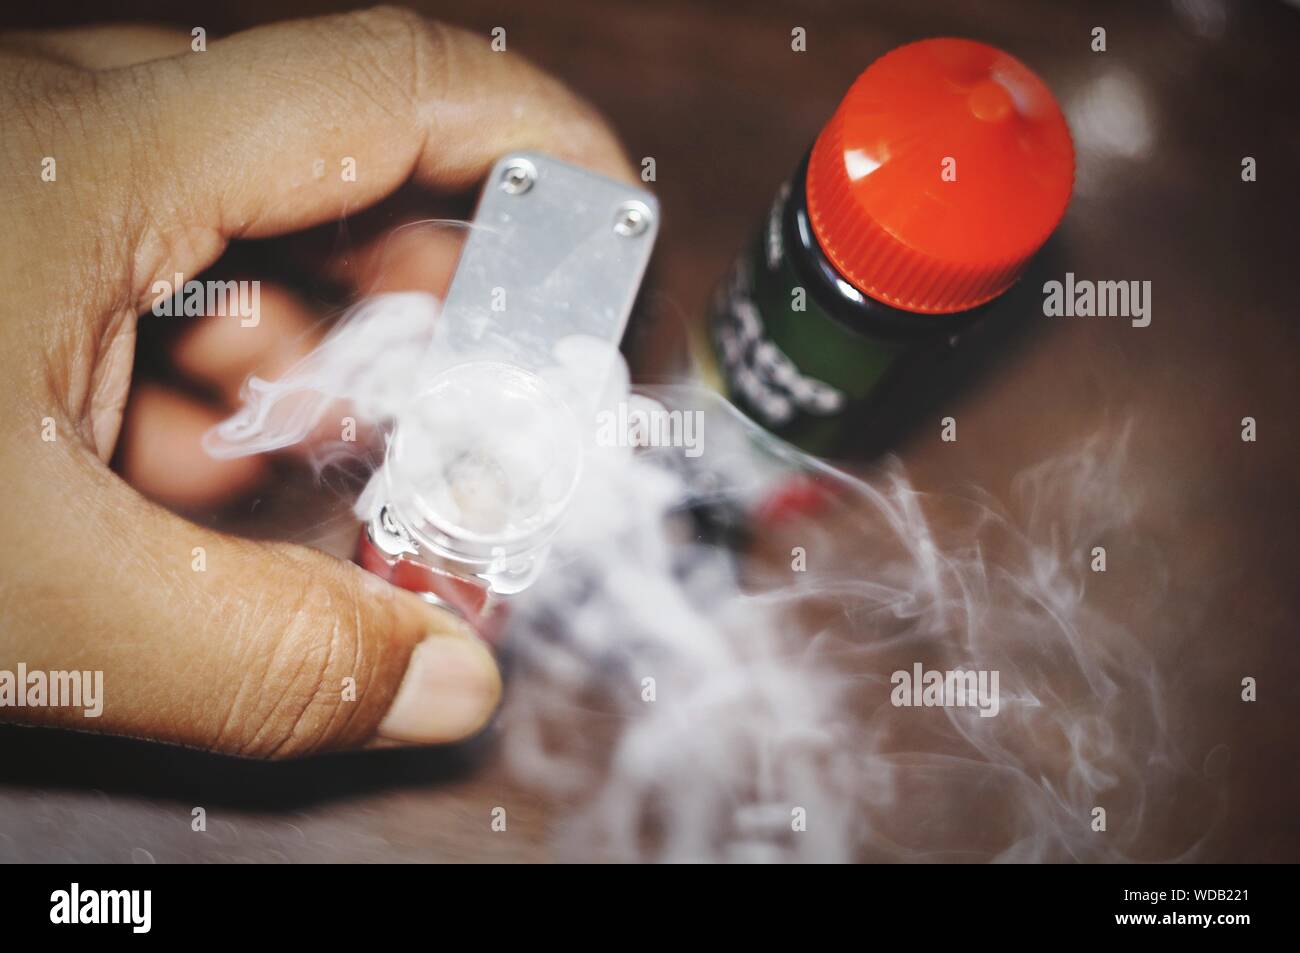 Close-up Of Hand Holding Narcotic Drug With Smoke Emitting From Bottle Stock Photo